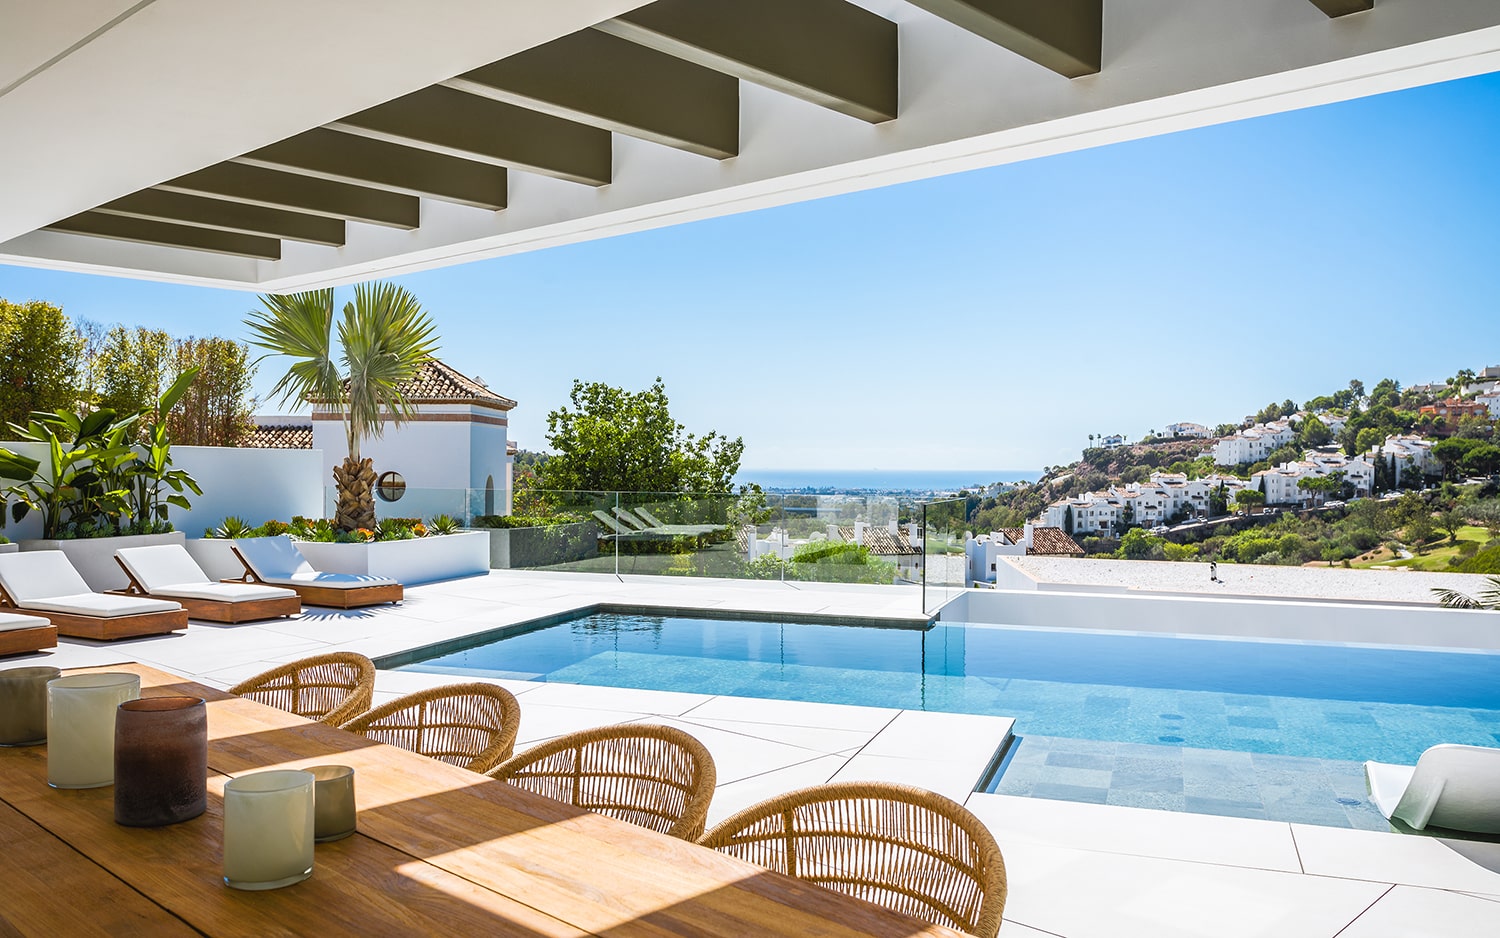 Marbella Real Estate; Investment in Exclusive Properties